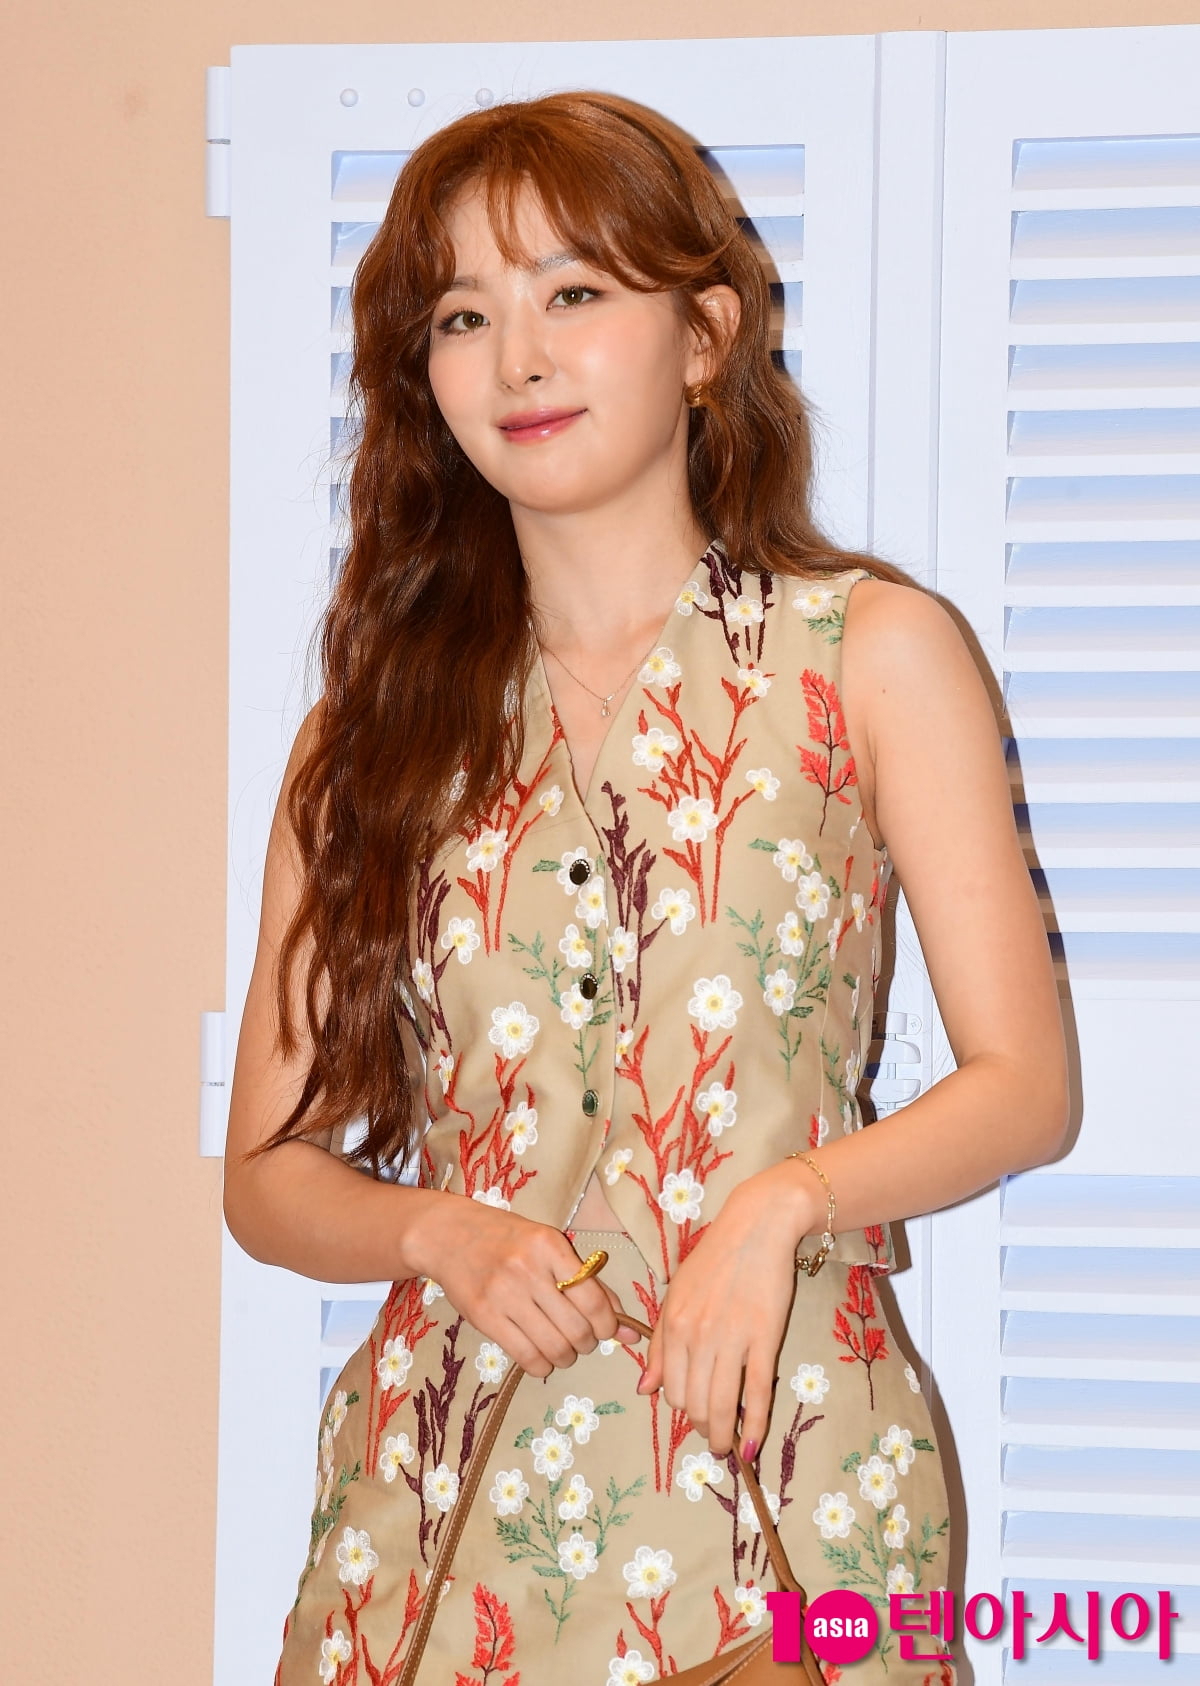 Red Velvet's Seulgi, a uniquely attractive woman who invites zooming in... Innocent + Sexy 